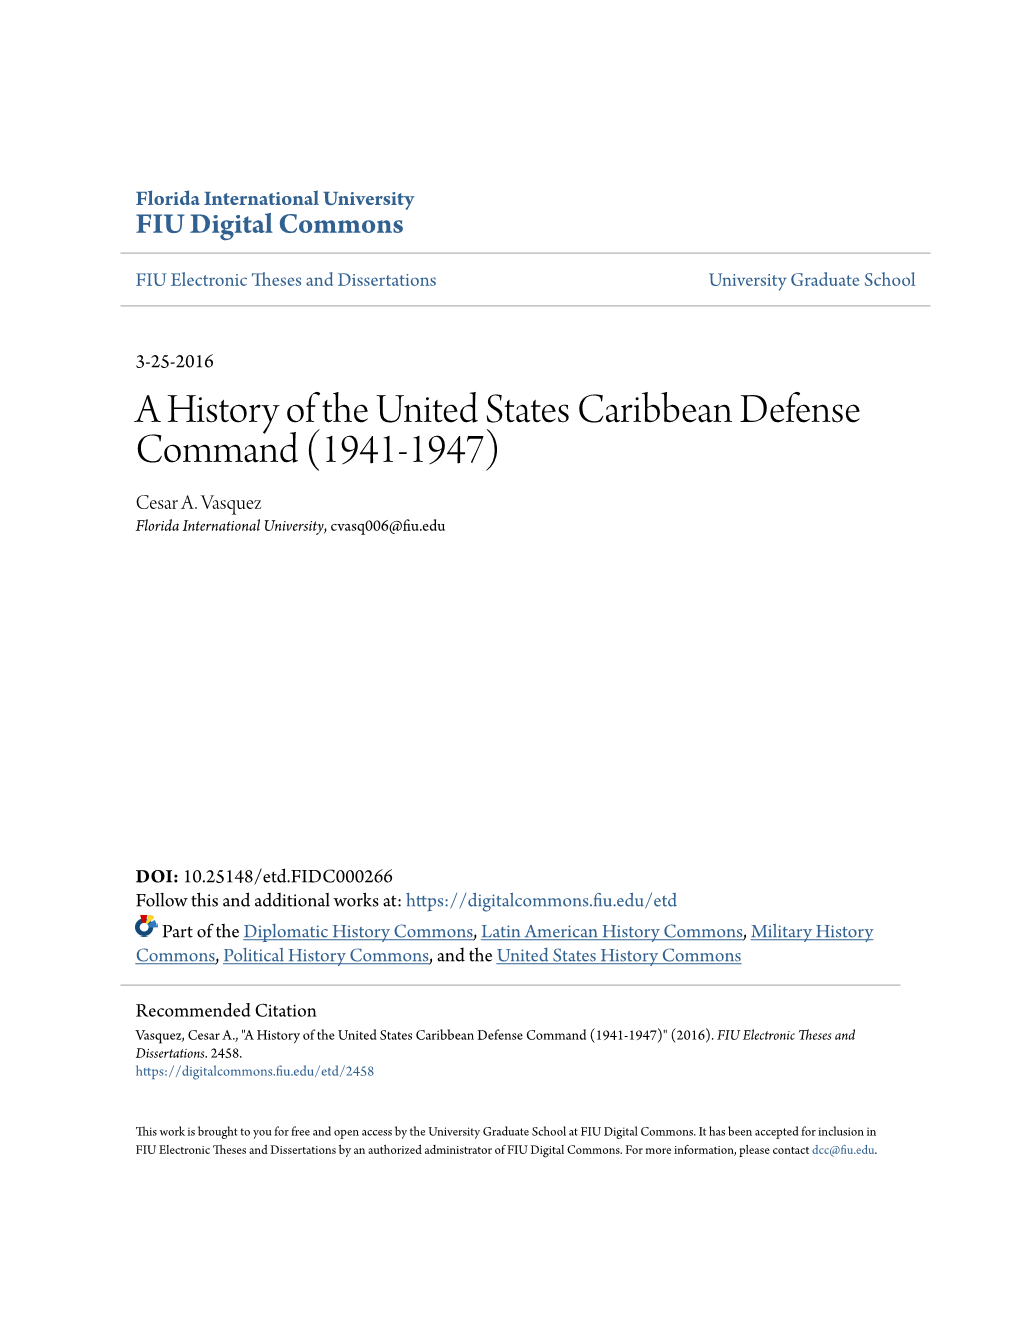 A History of the United States Caribbean Defense Command (1941-1947) Cesar A